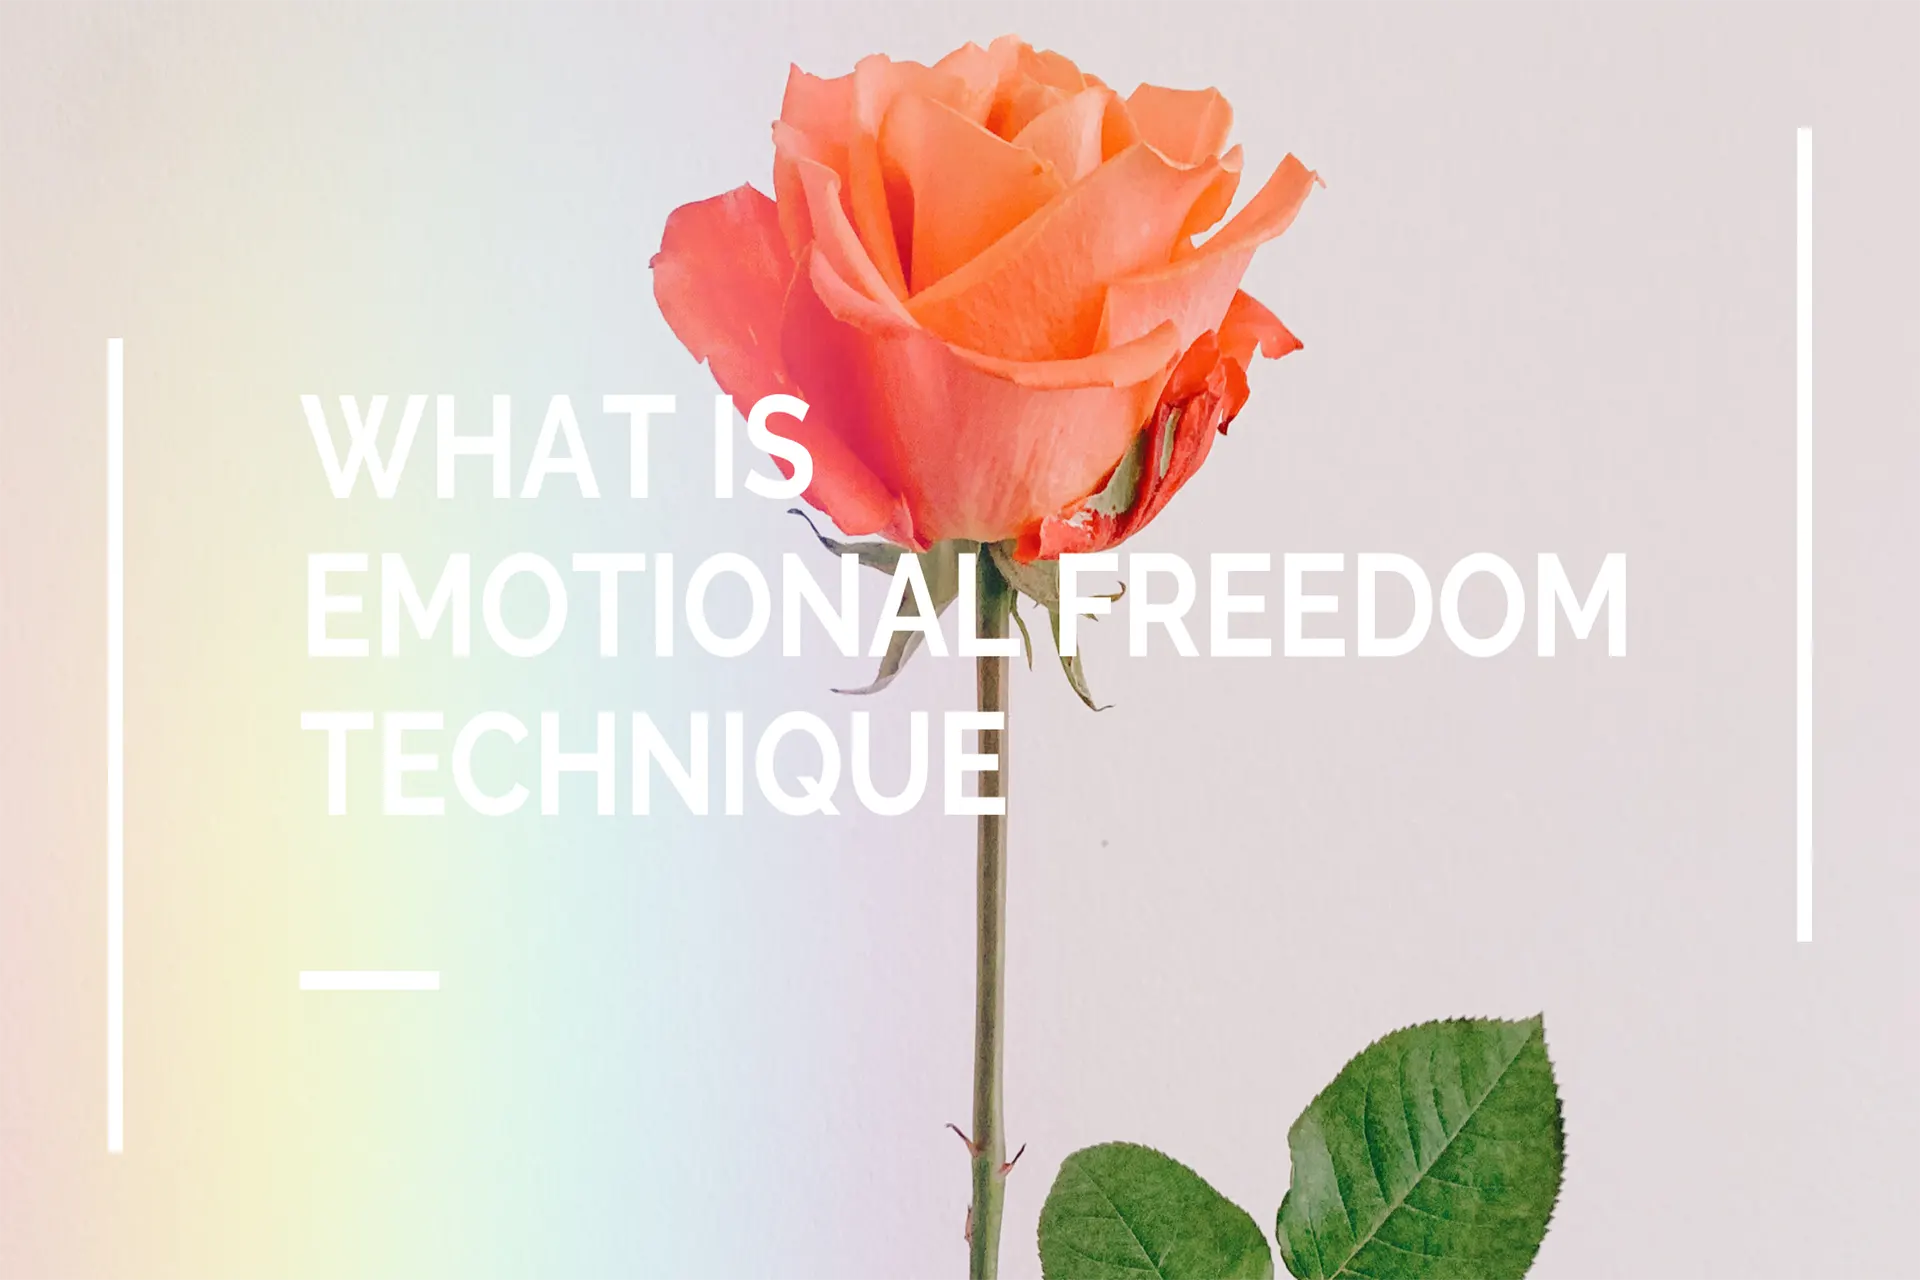 What is Emotional Freedom Technique?